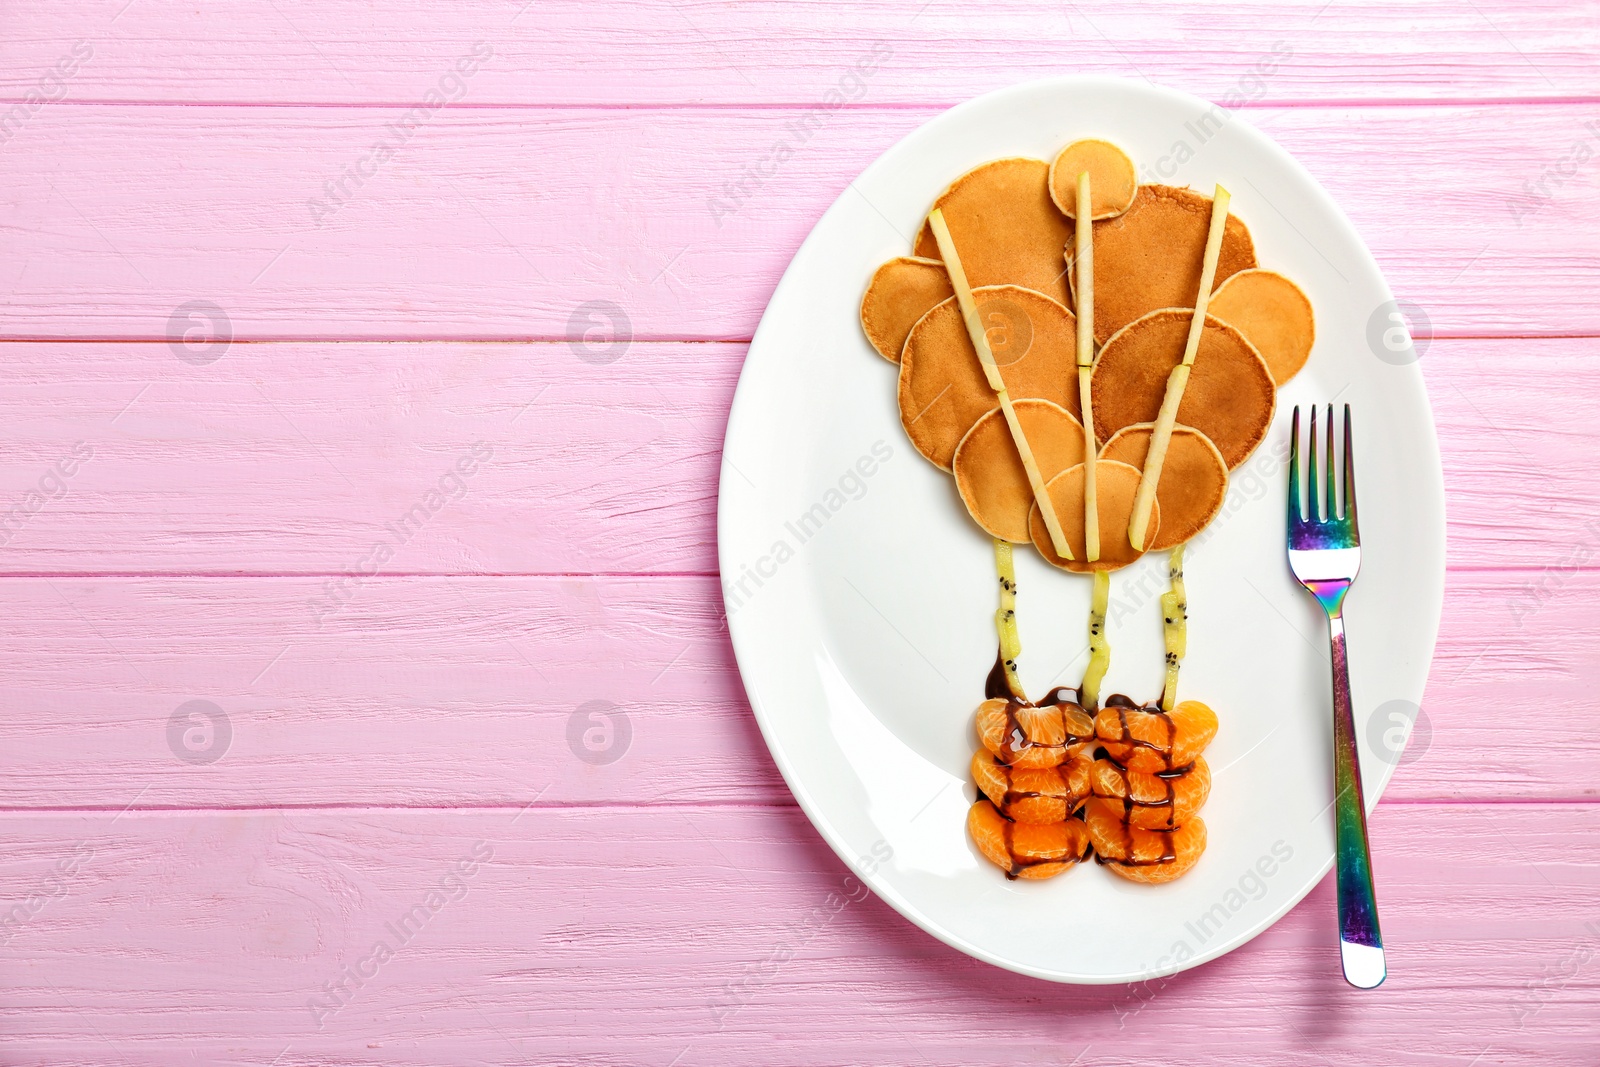 Photo of Plate with pancakes in form of hot air balloon on wooden background. Creative breakfast ideas for kids